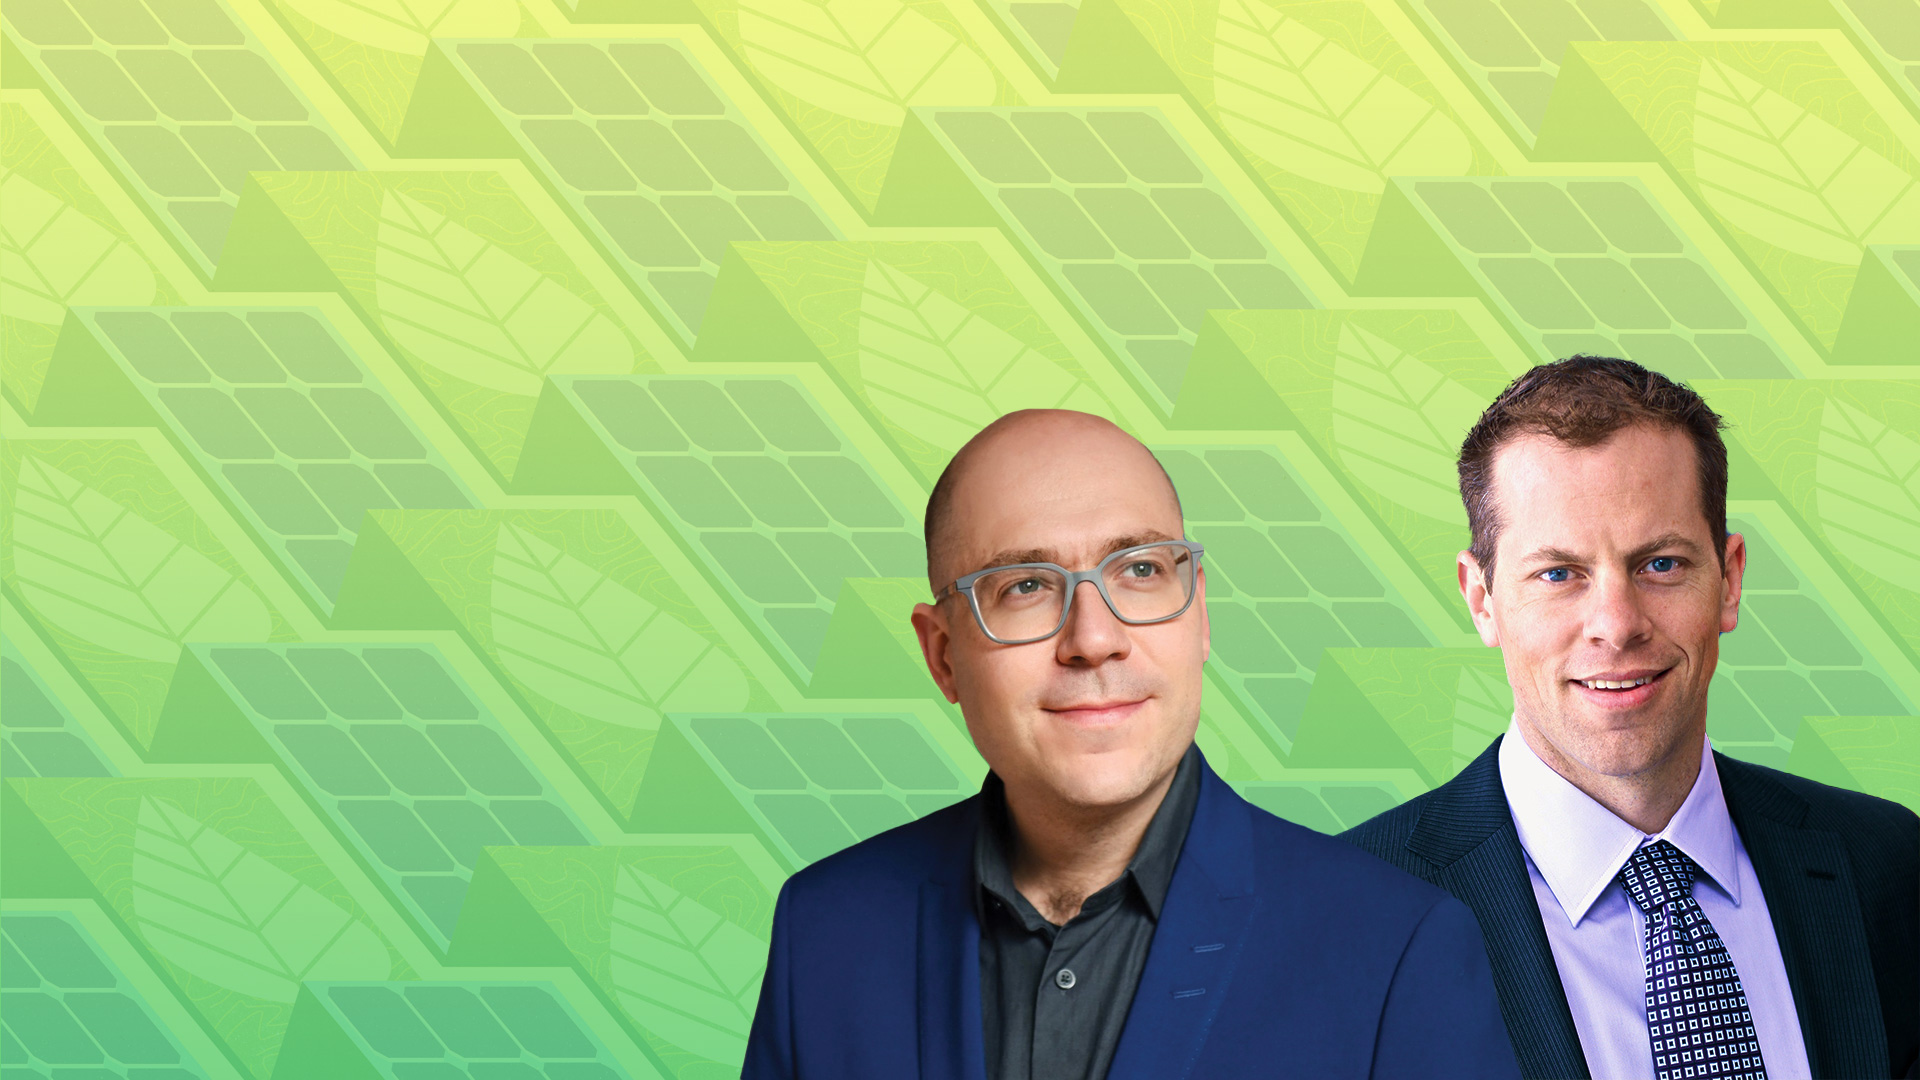 Photo Alan Aspuru-Guzik and Curtis Berlinguette on a green background with repeating illustrations of leaves and solar panels